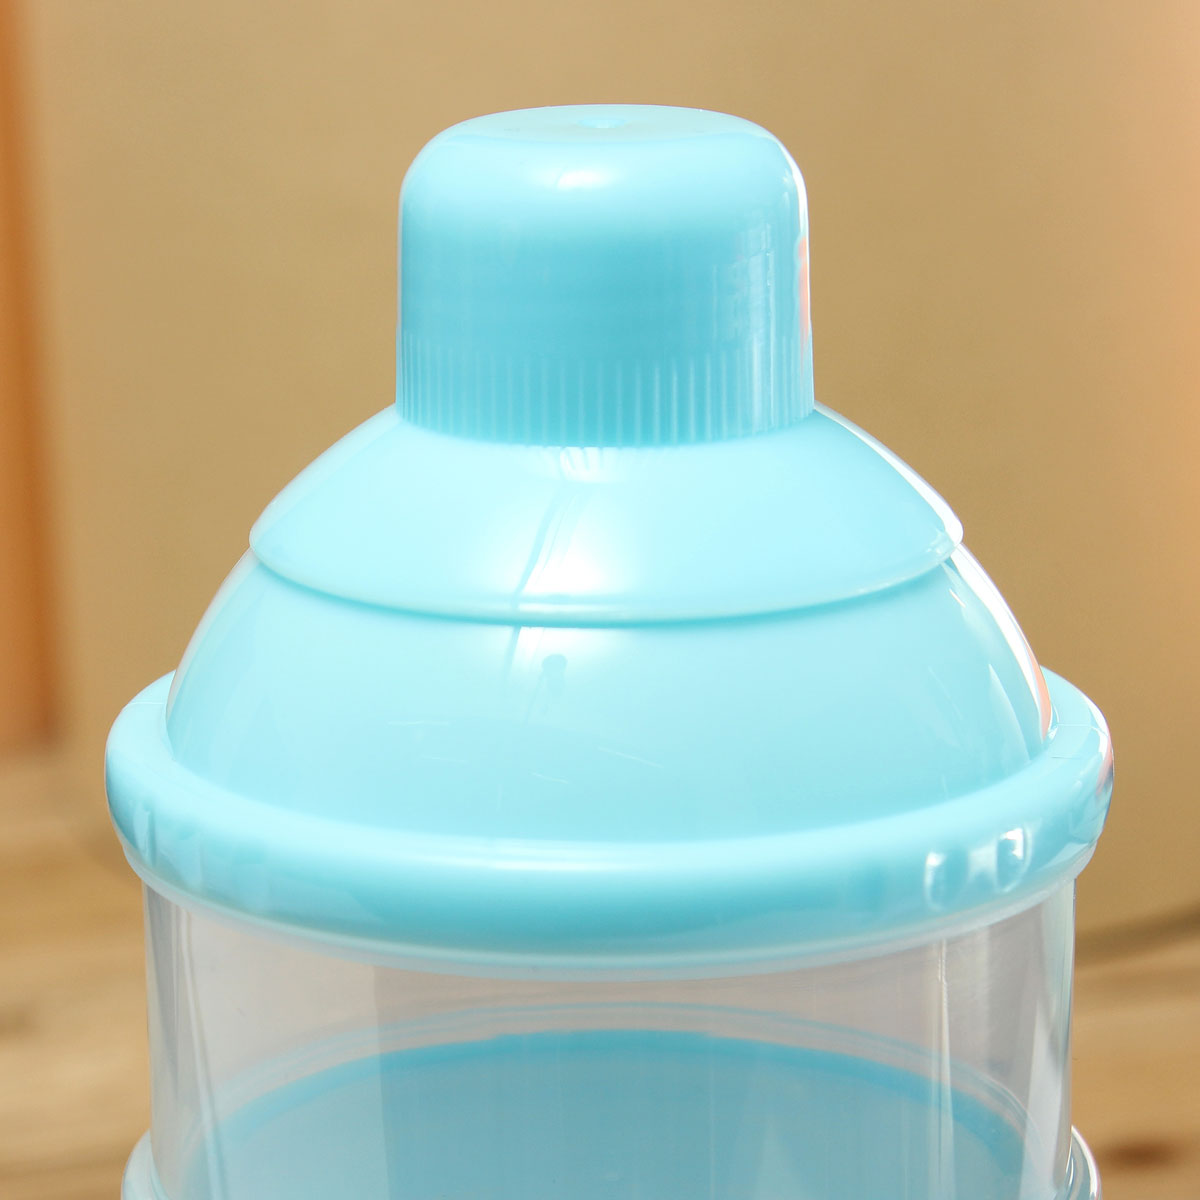 Random-Color-3-Layer-Baby-Milk-Feed-Powder-Dispenser-Container-Compartment-Travel-Bottle-Storage-Box-1031226